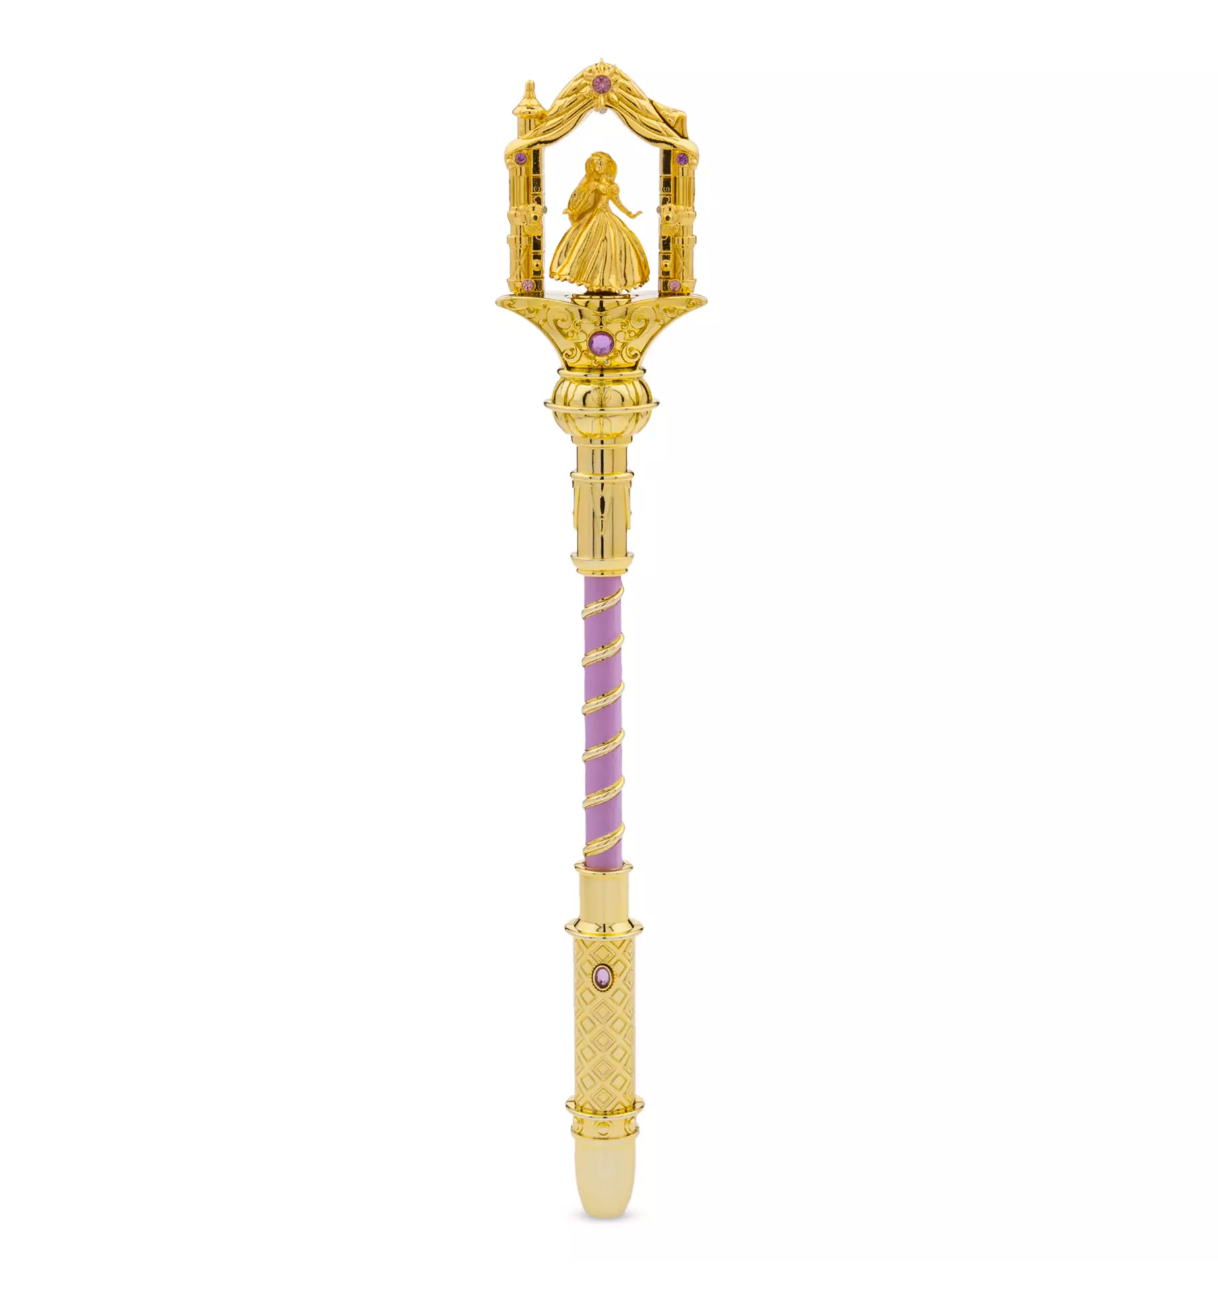 Disney Princess Tangled Rapunzel Light-Up Wand Toy New with Card